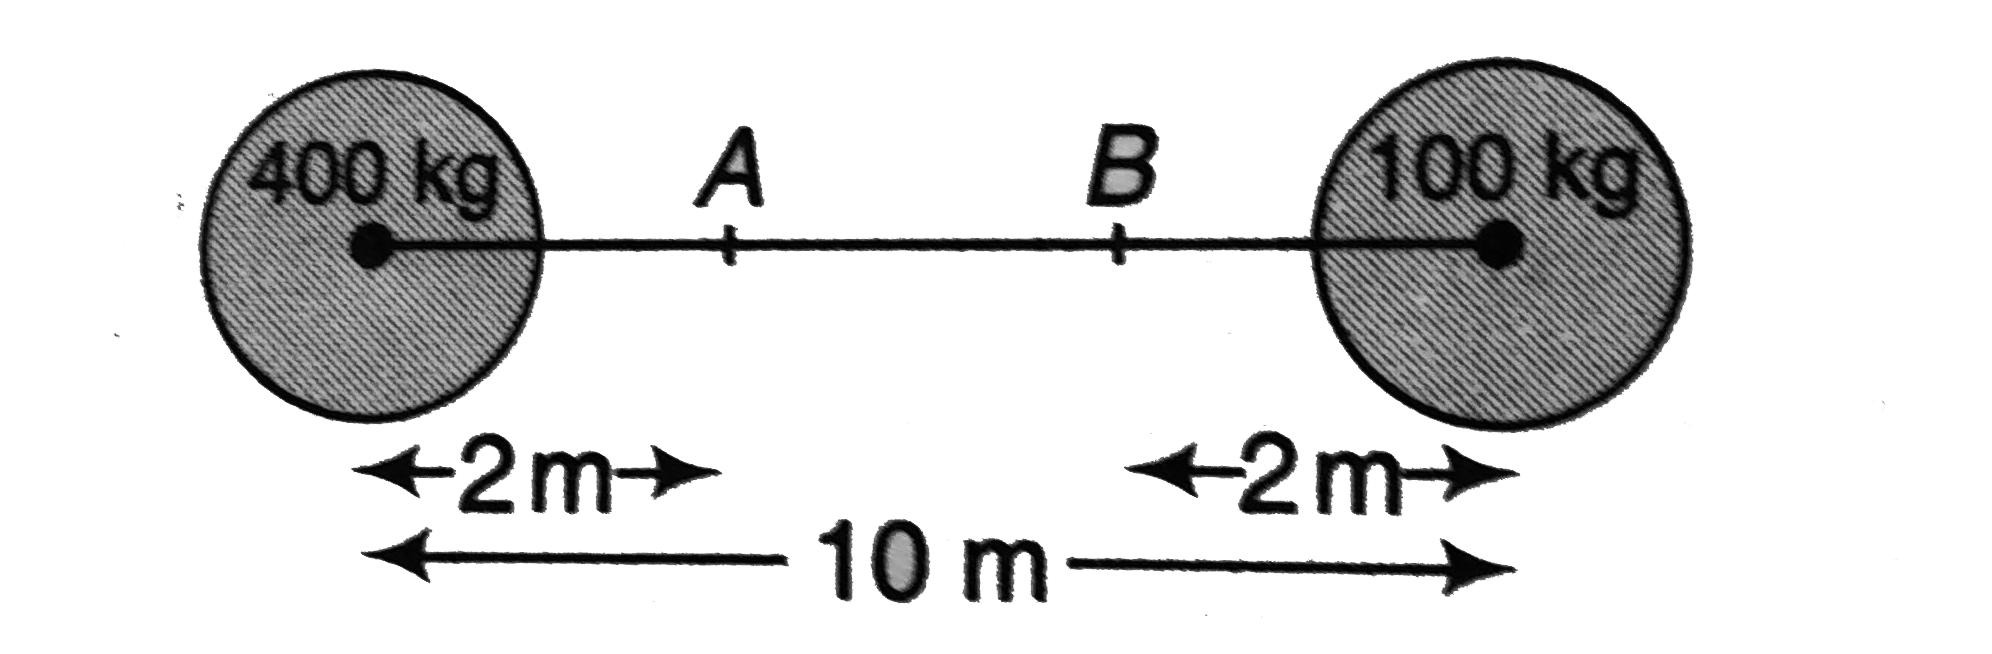 In the figure masses 400 kg and 100 kg are fixed.      (a) How much work must be done to move a 1 kg mass from point A to point B?   (b) What is the minimum kinetic energy with which the 1 kg mass must be projected from A to the right to reach the point B?